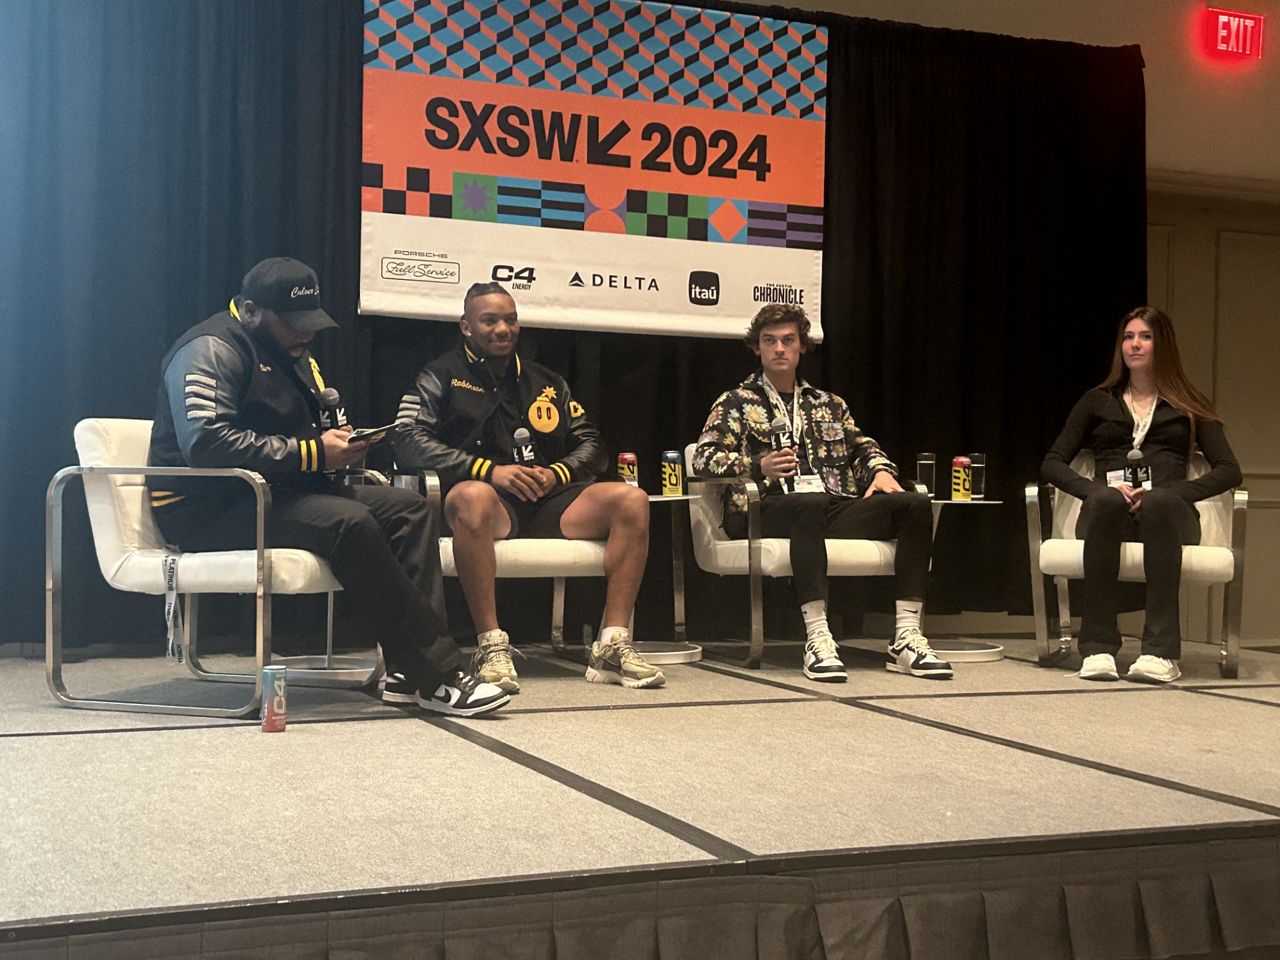 Nutrabolt's Director of Talent & Influencer Marketing Marquel Carter (left) moderated a panel of college athletes talking about NIL featuring Atlanta Falcons running back Bijan Robinson (middle left), Texas track and field star Sam Hurley (middle right) and Texas volleyball player Ayden Aimes (right) at SXSW on Sunday, March 10, 2024. (Katharine Finnerty/Spectrum News)